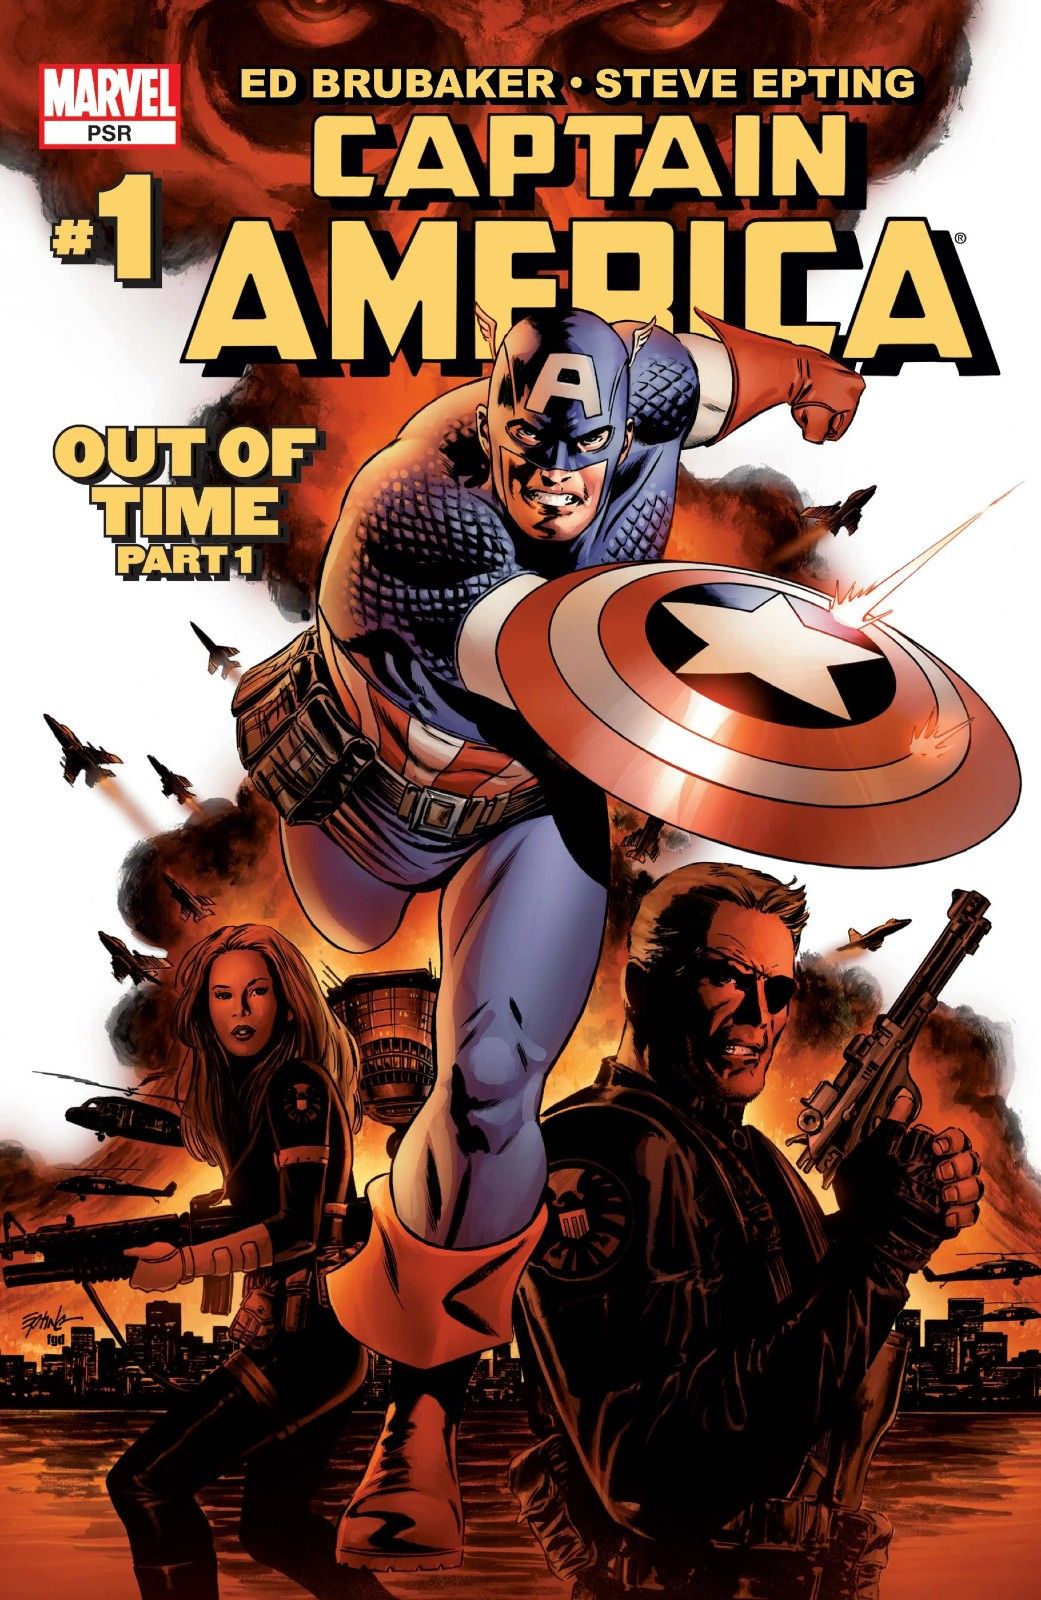 Captain America runs with an explosion behind him in Captain America (Vol. 5) #1 by Marvel